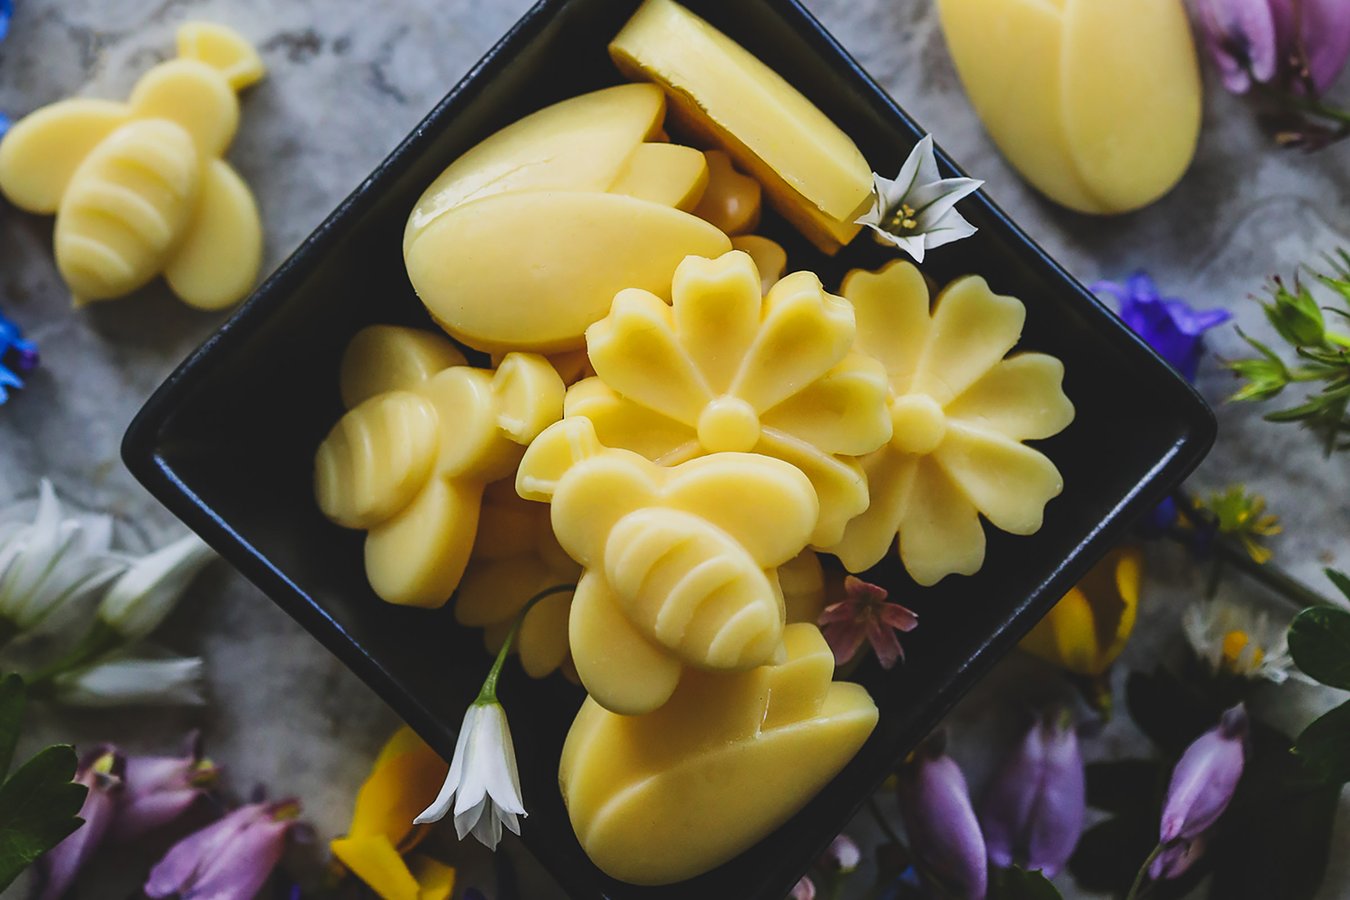 Spring Wax Melts in the shapes of bees and flowers sitting in a bowl- surrounded by fresh flowers. 